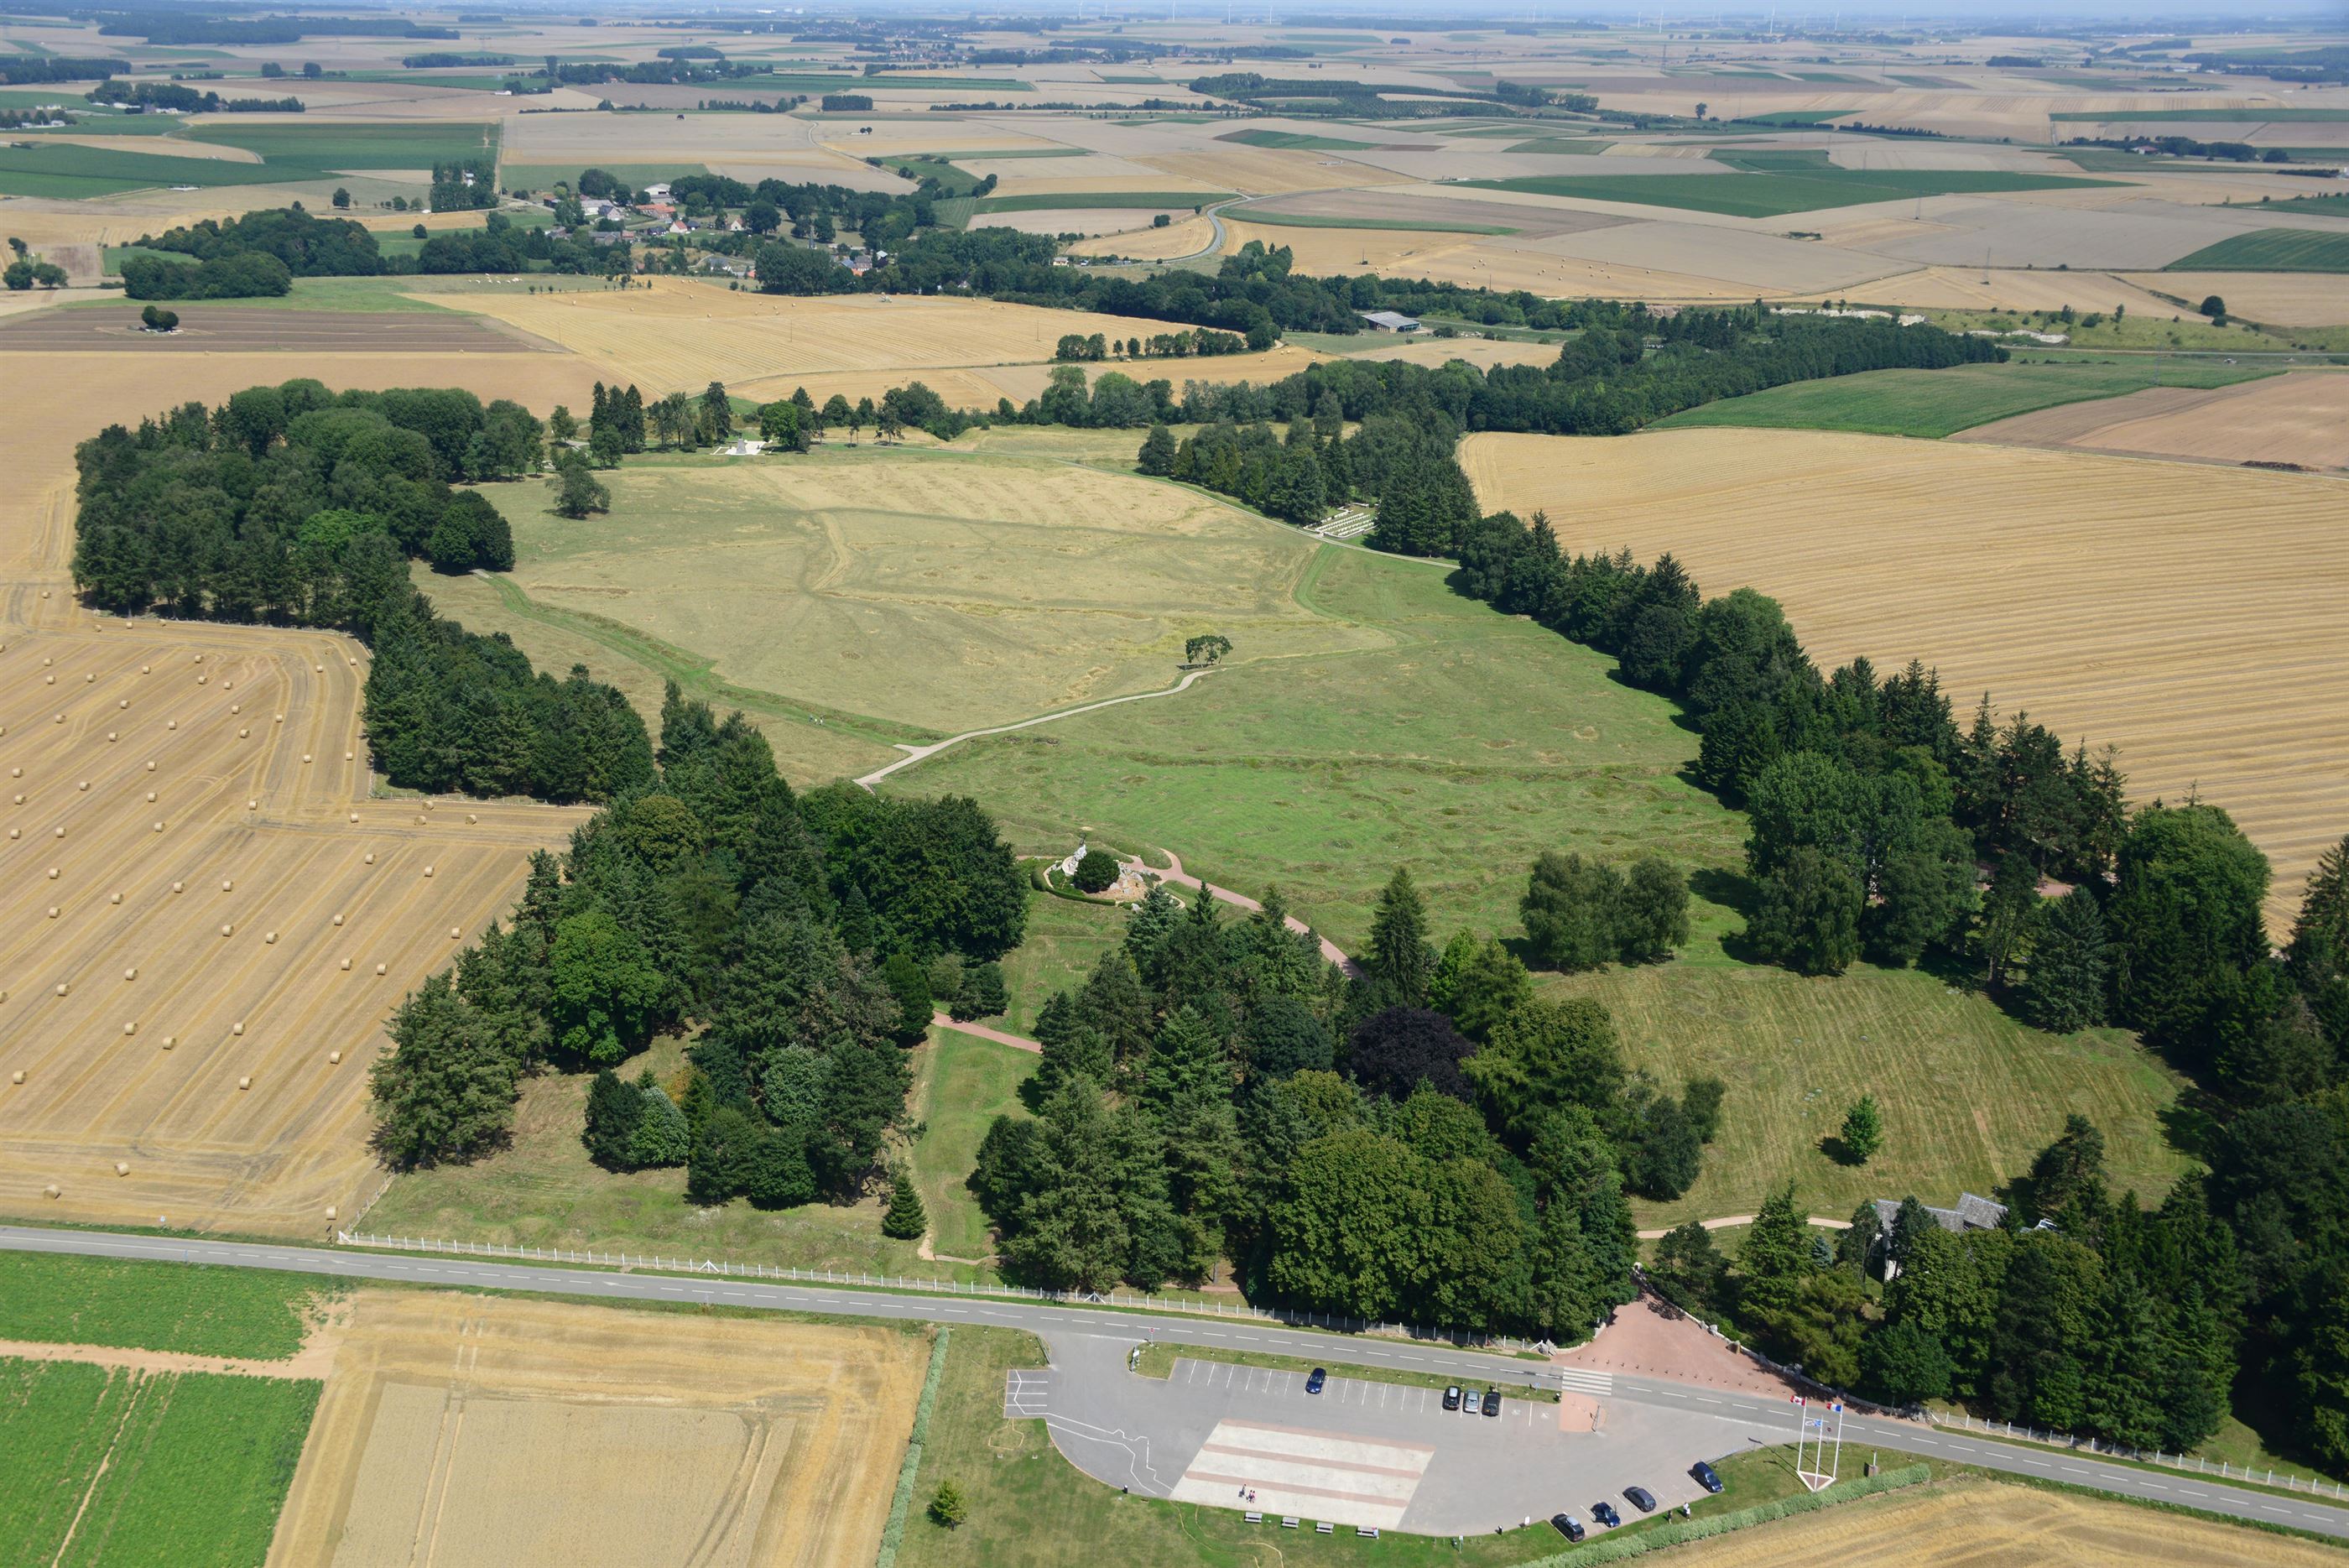 Aerial view of 30 hectares the Beaumont-Hamel Newfoundland Memorial